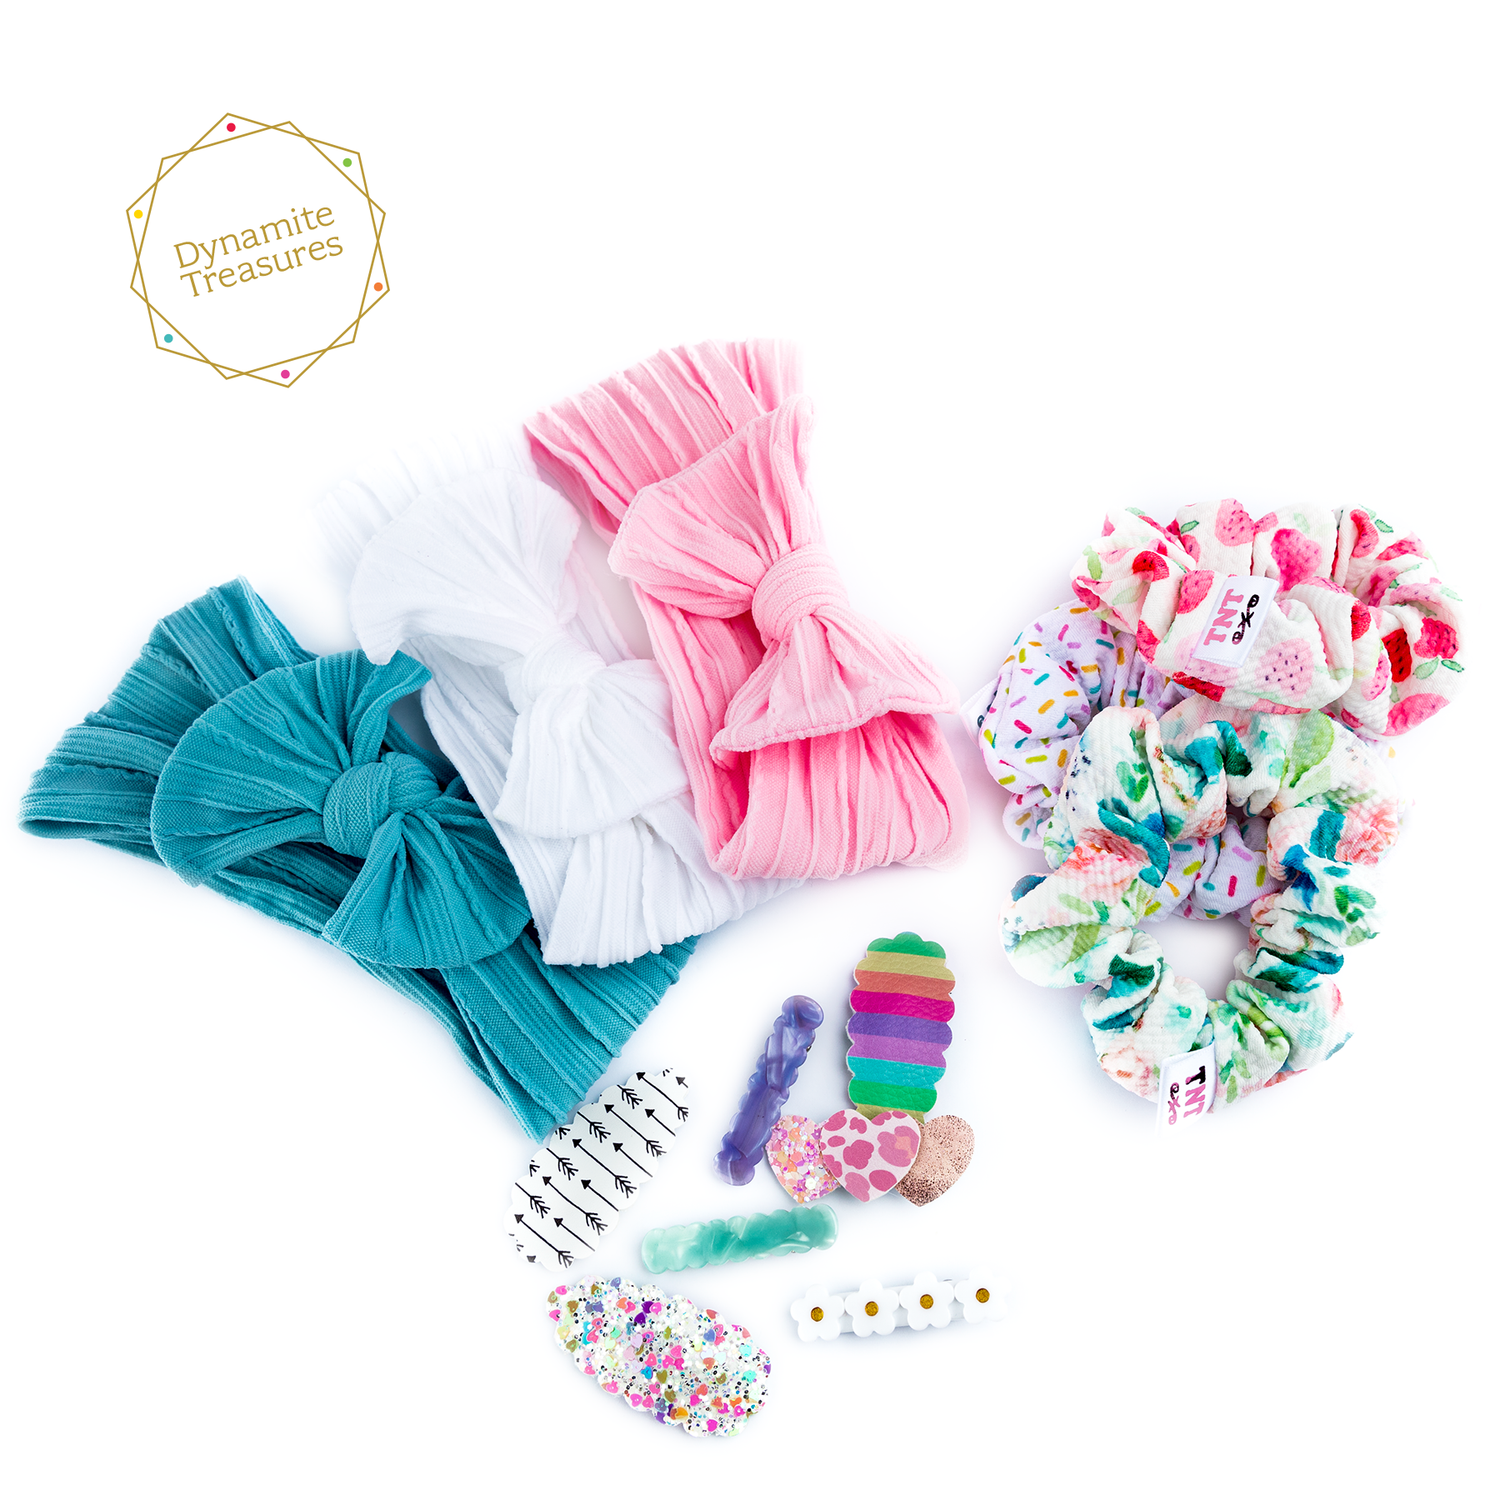 Hair Accessories - Hairbows, scrunchies, clips & Headbands for Babies to Adults